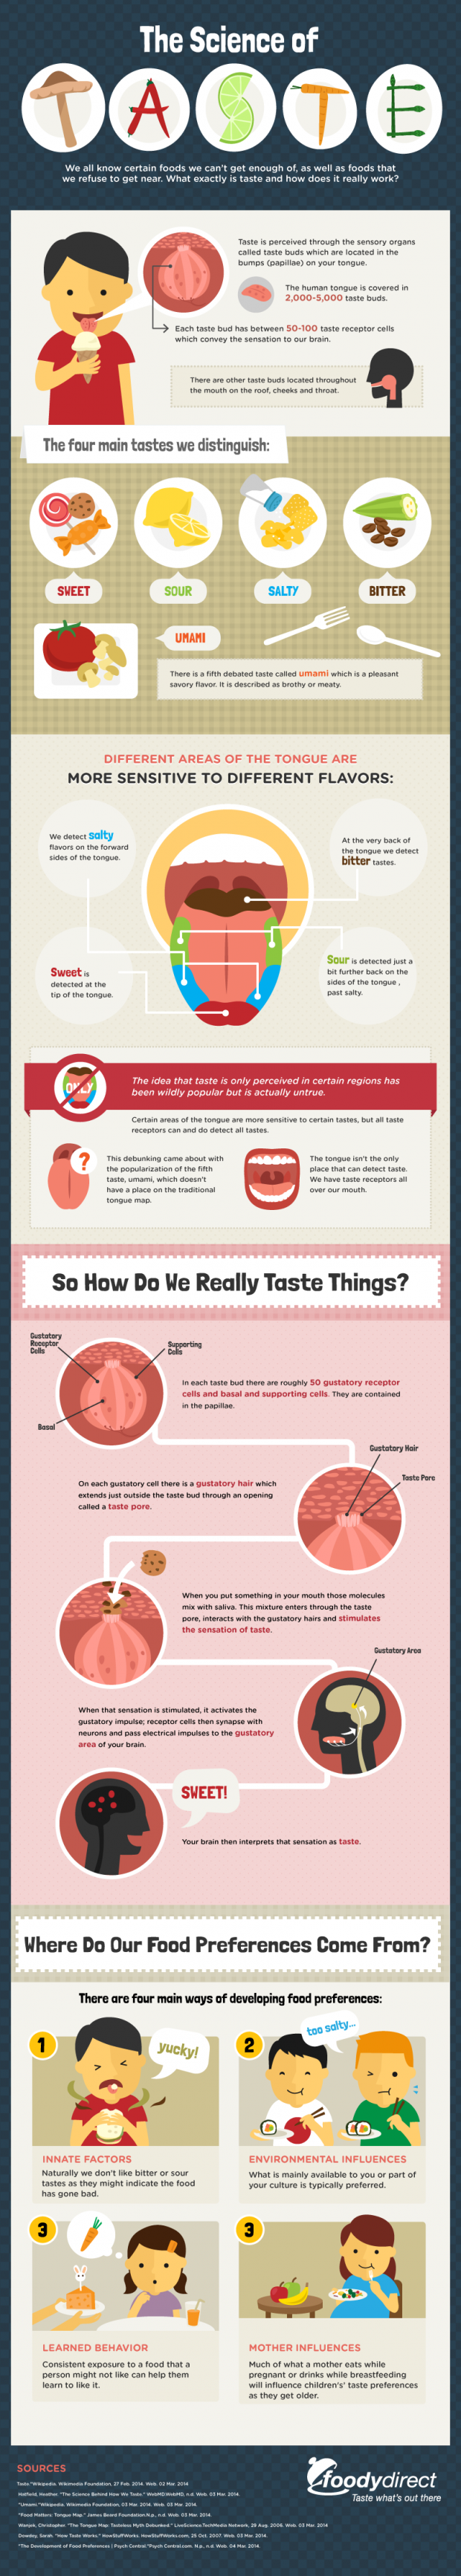 the-science-of-taste-infographic